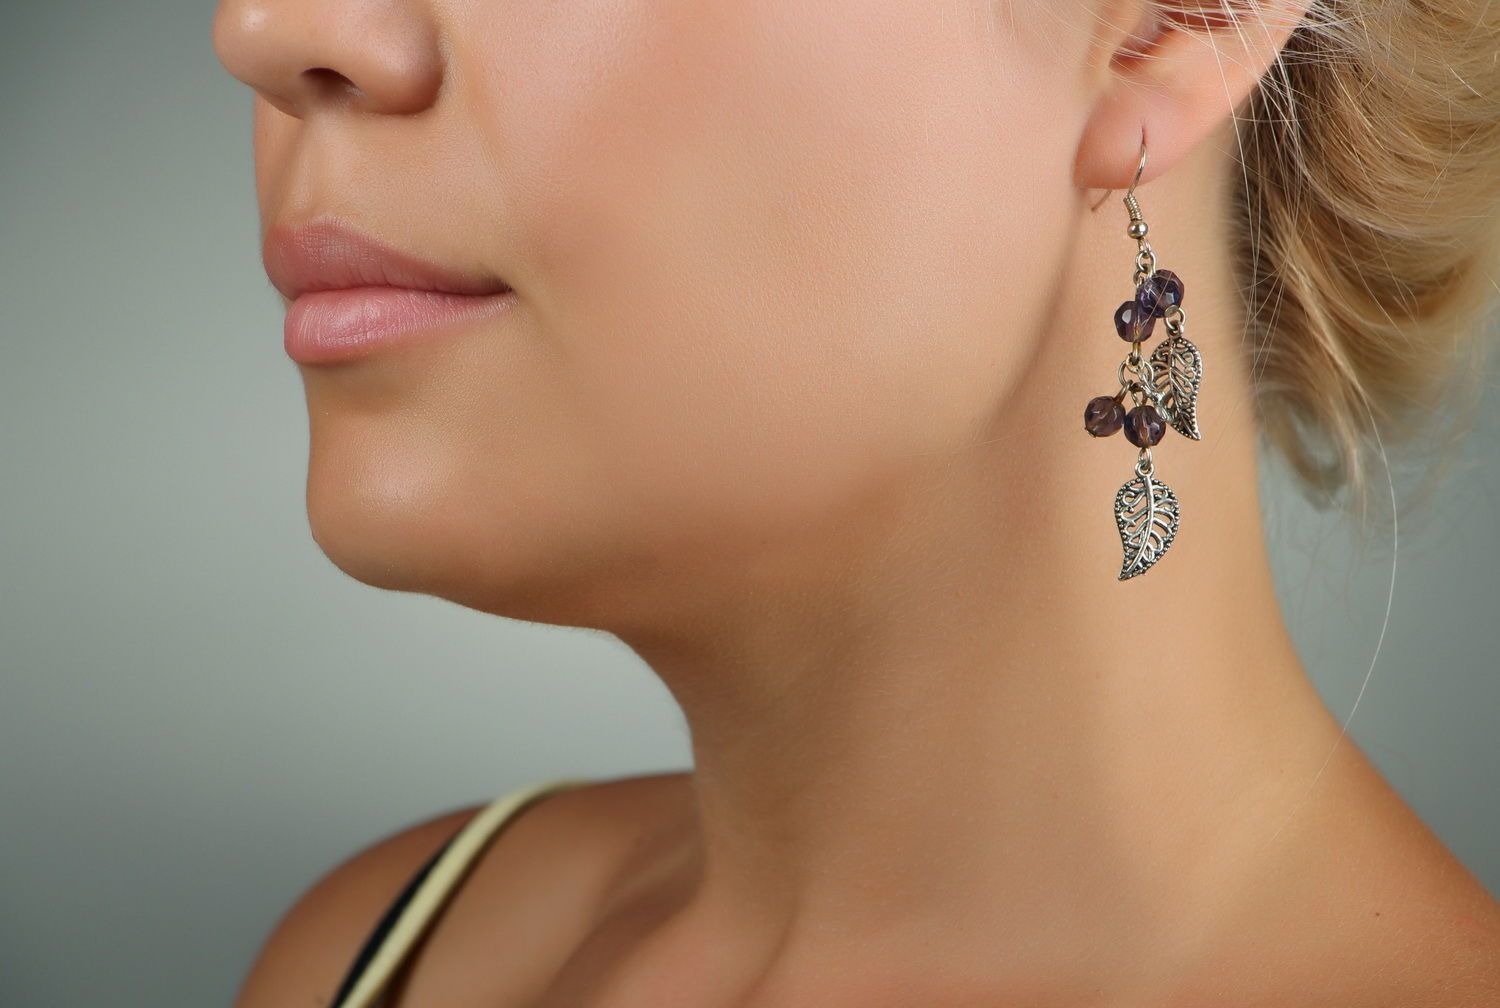 Earrings made of steel and glass Currant berries photo 4